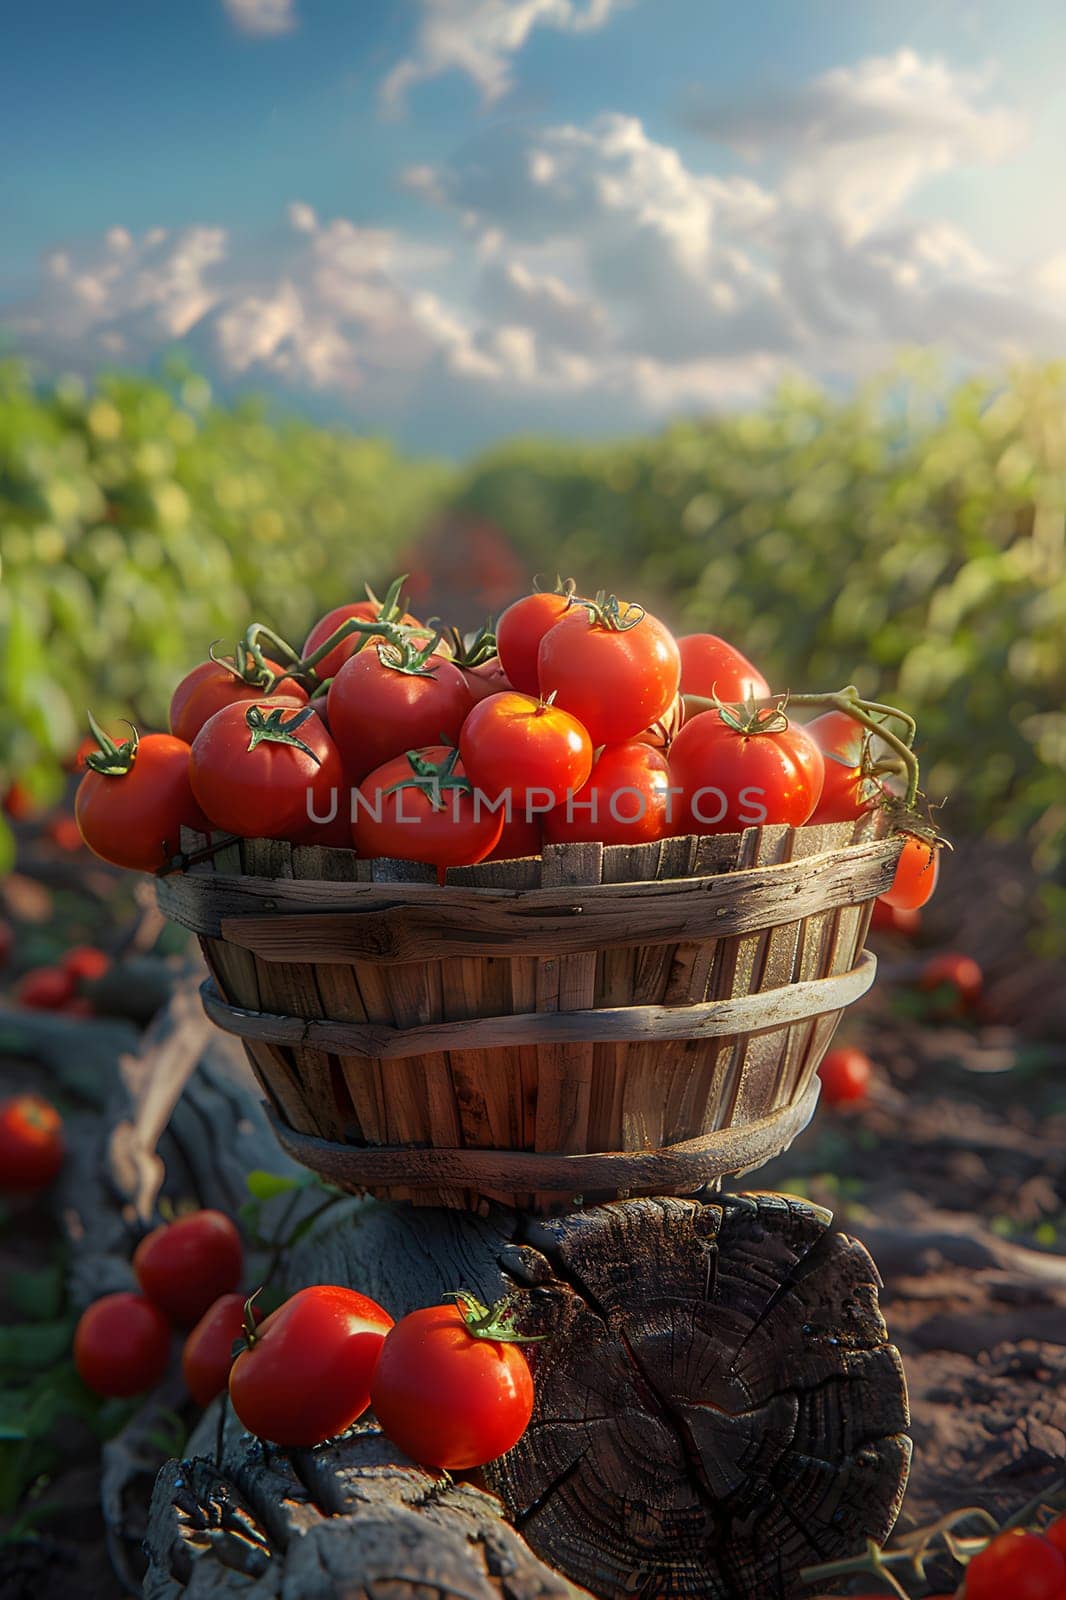 A basket filled with tomatoes sits on a tree stump in a field under the cloudy sky. The tomatoes are natural foods and can be used as ingredients in recipes